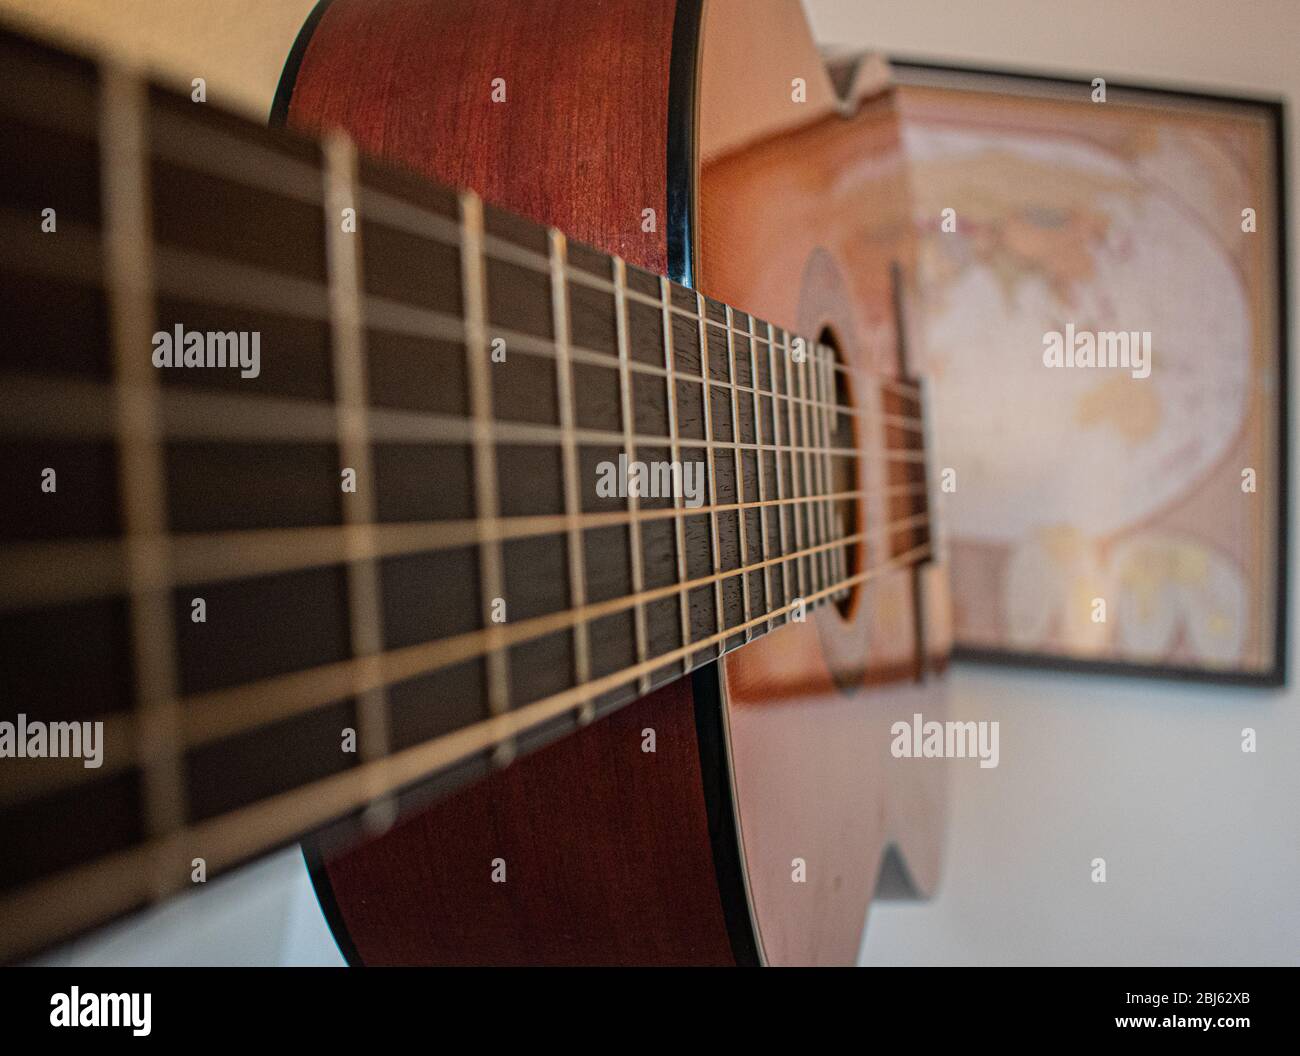 Acoustic guitar Stock Photo